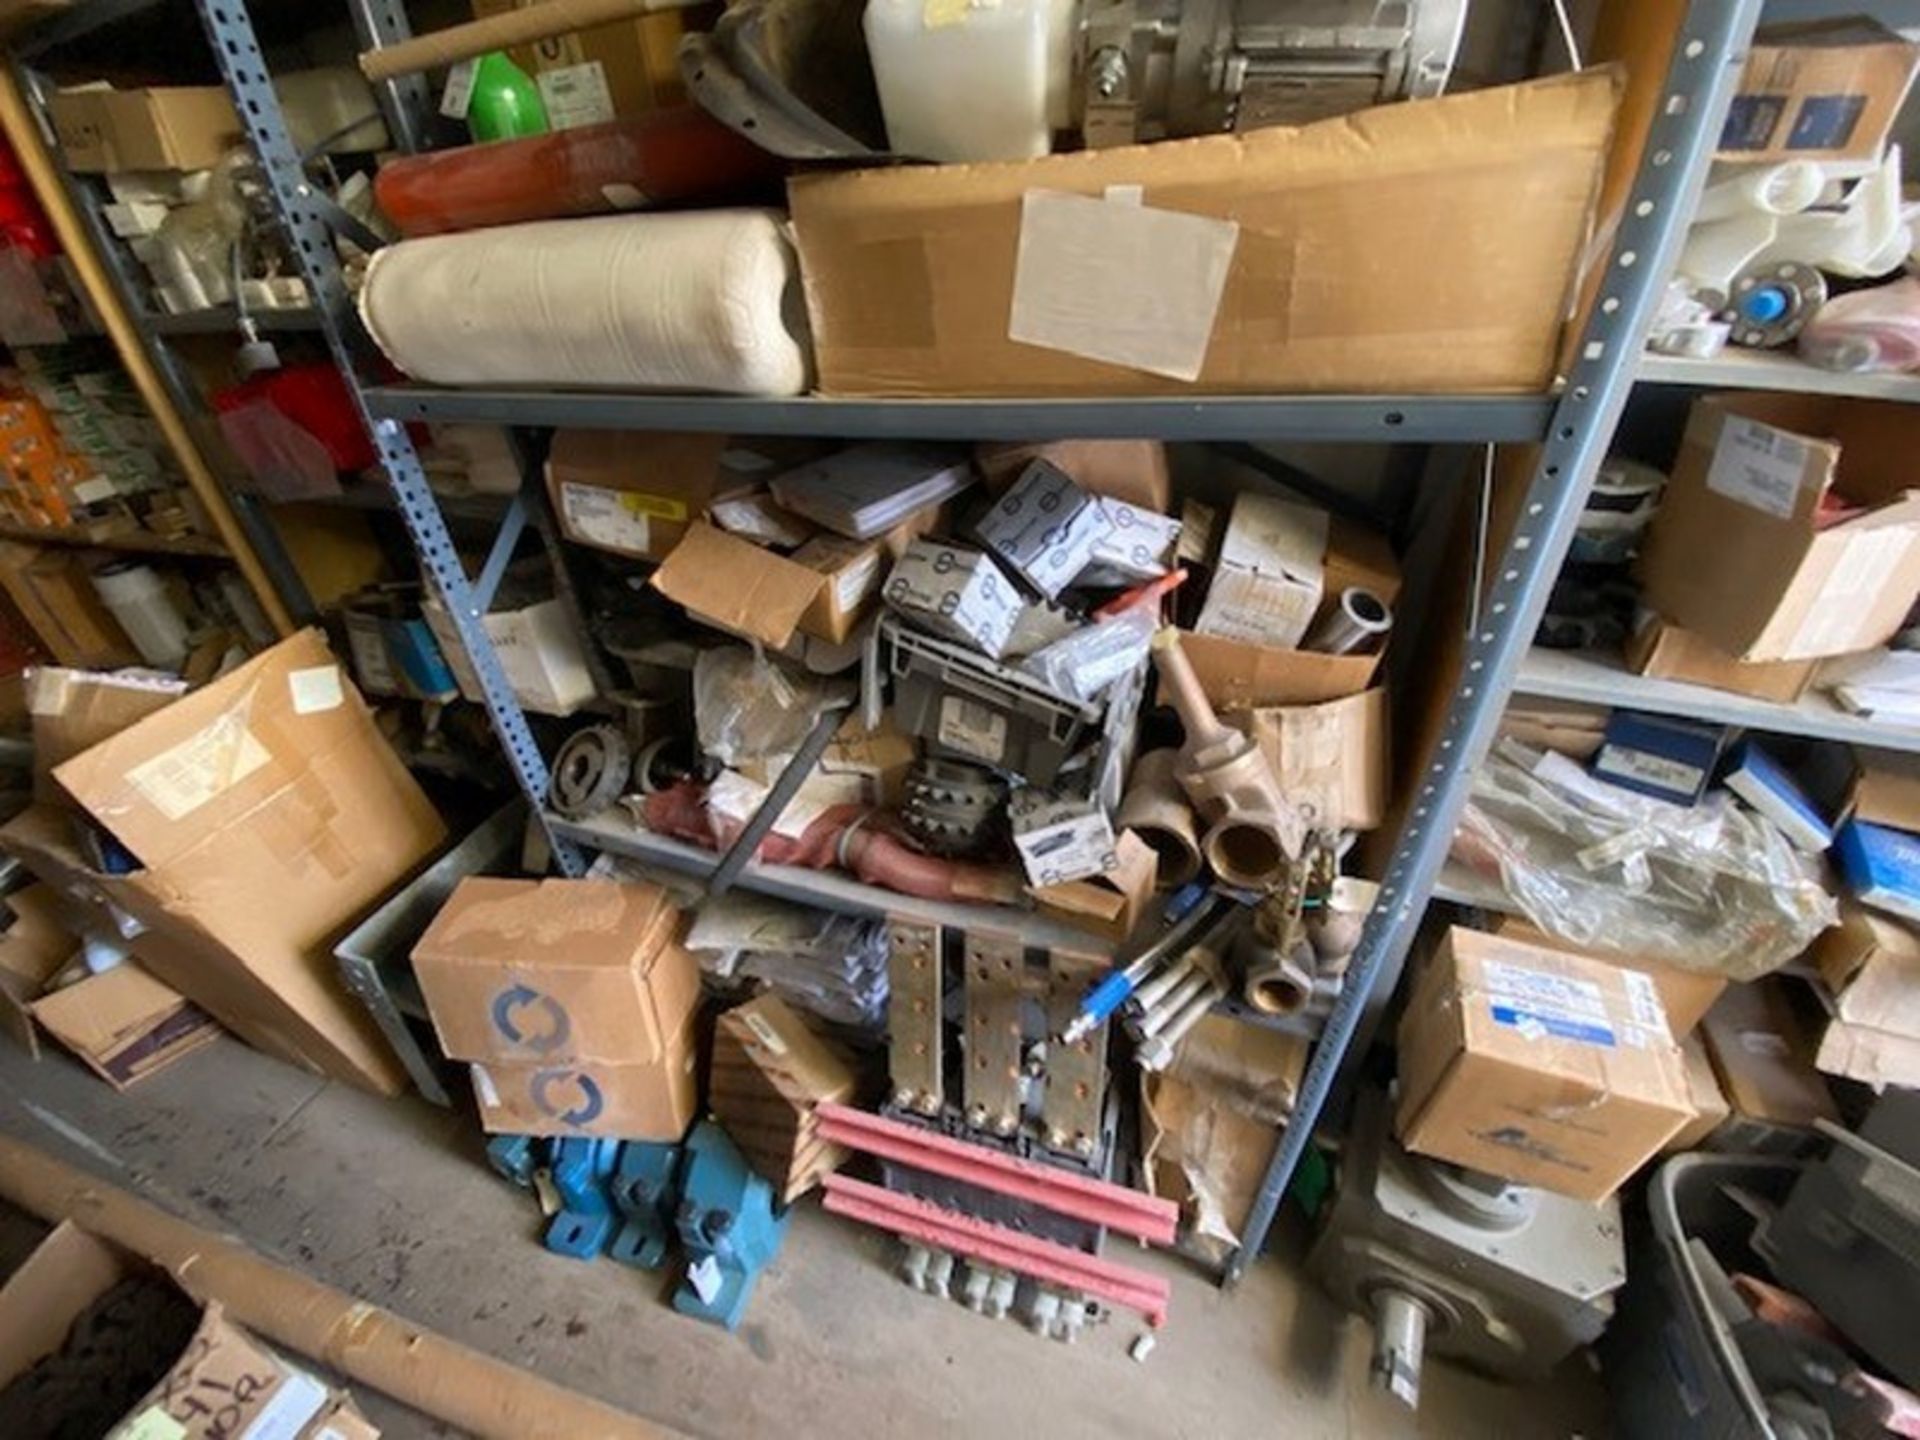 Assorted Spare Parts on 4-Shelving Units, Includes Sprockets, Gauges, Valves, Bearings, Motors, - Image 10 of 17